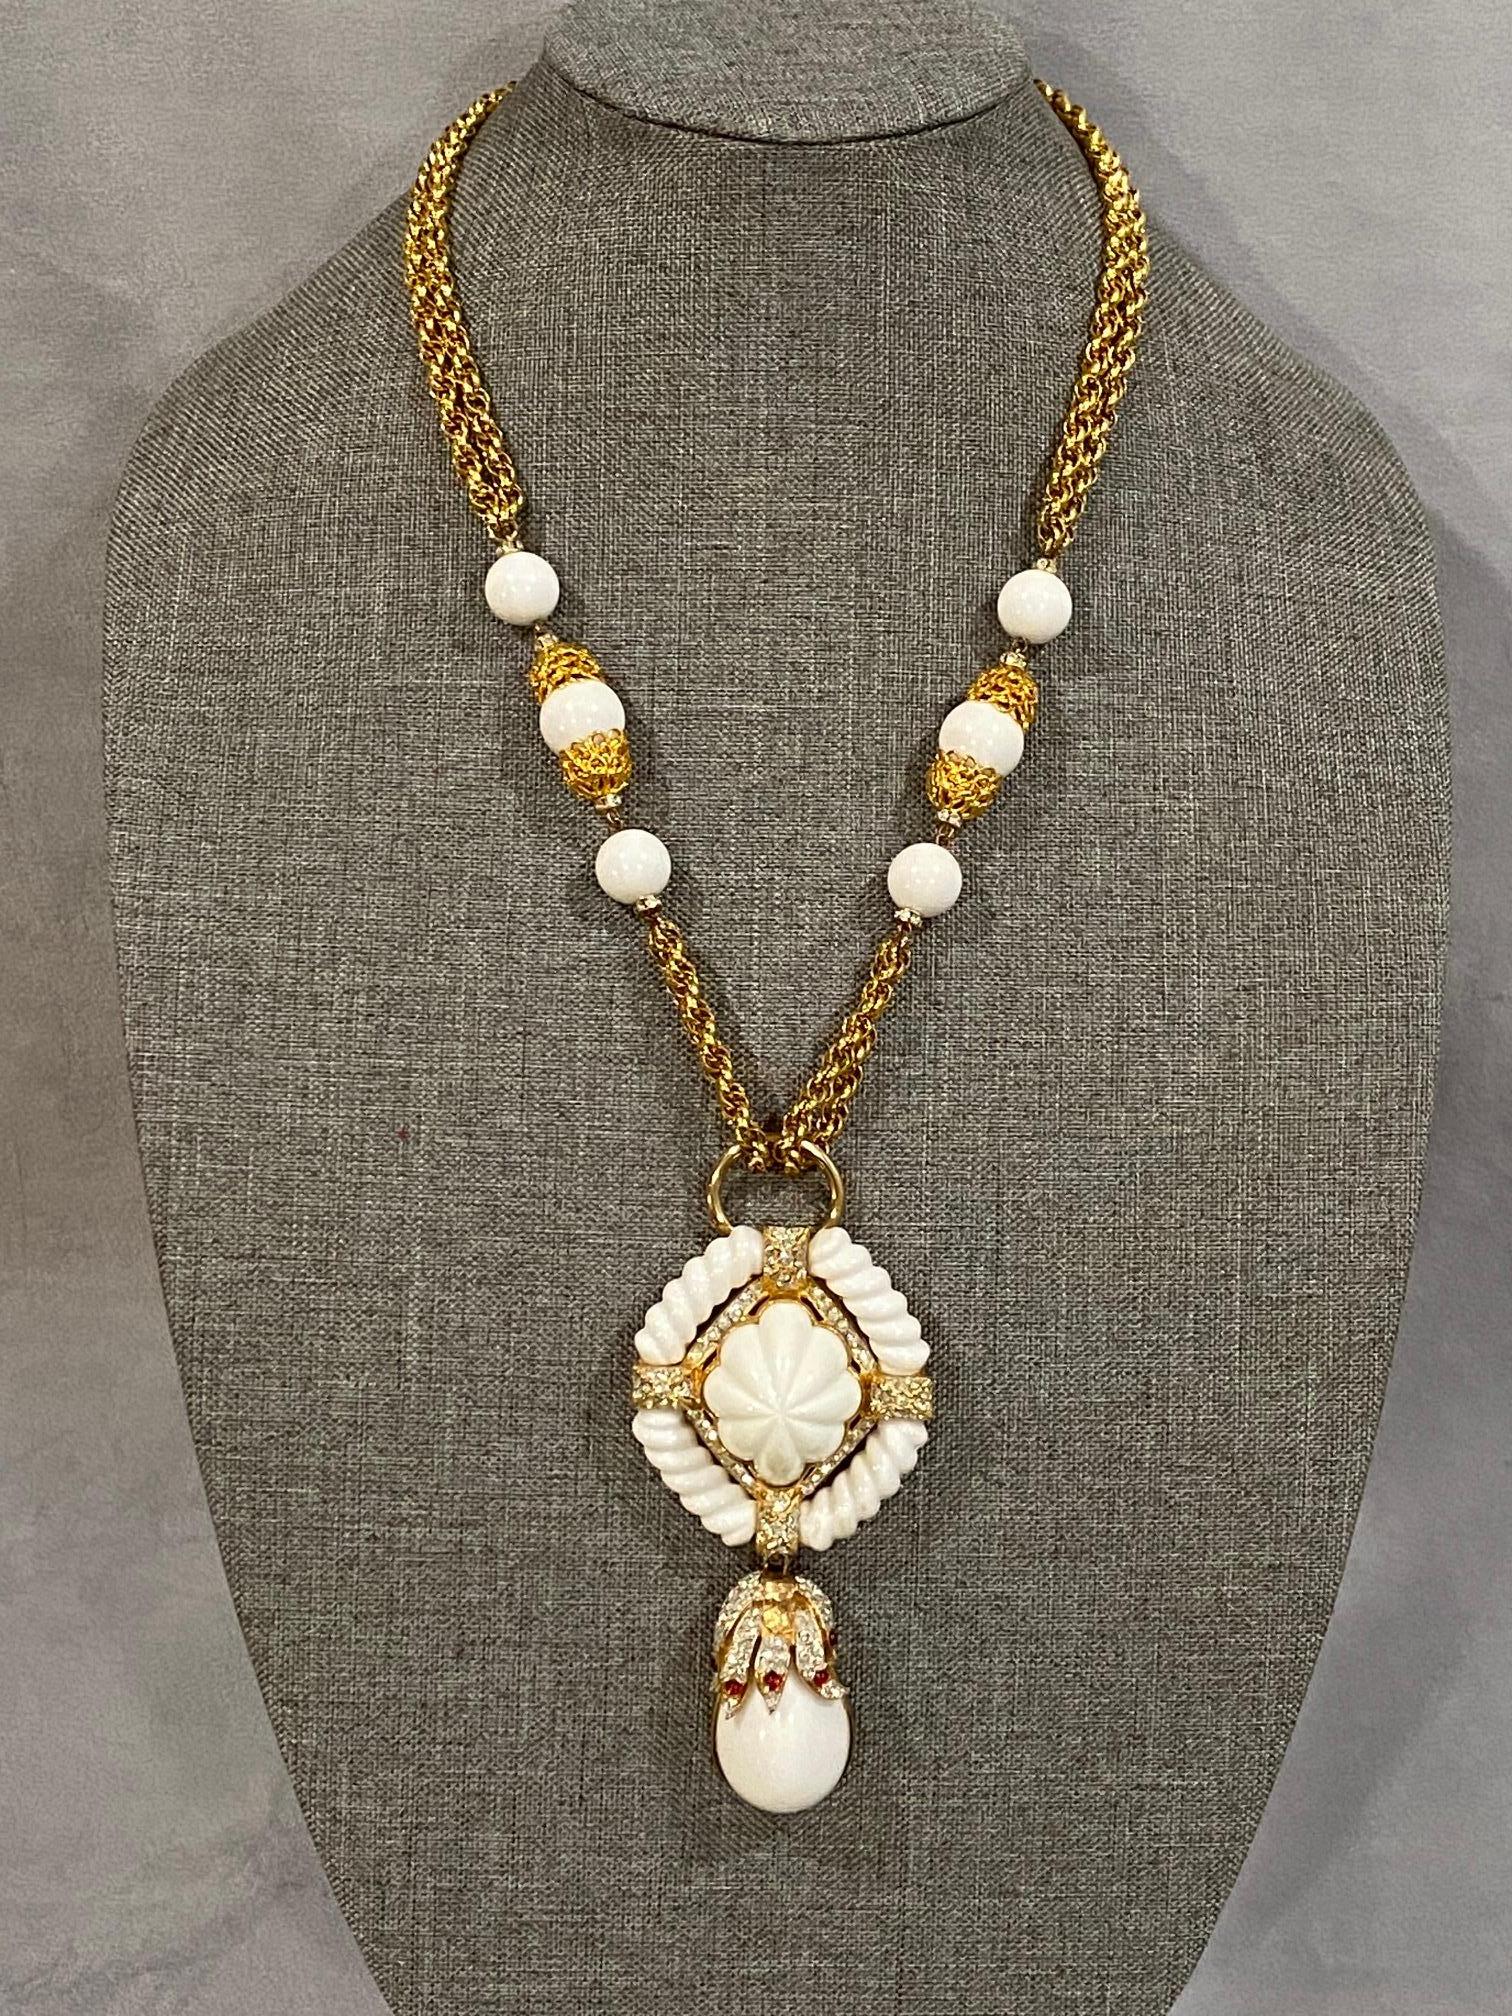 Les Bernard 1980s Pendant Necklace in Gold & White with Rhinestone Accent For Sale 1